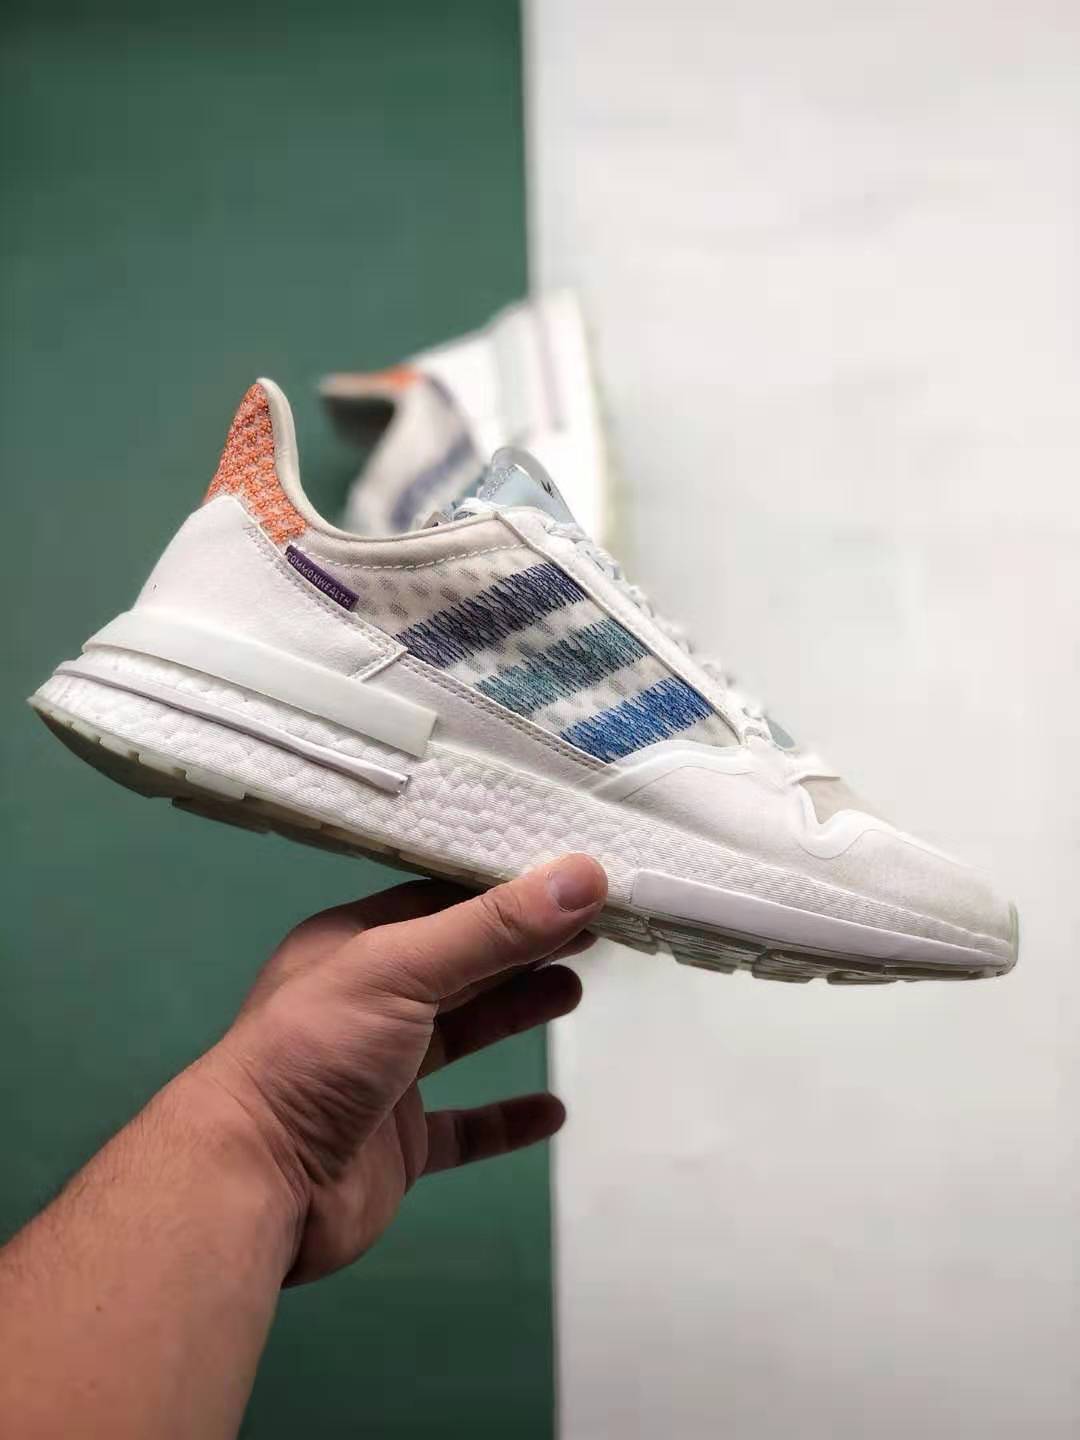 Adidas Commonwealth x ZX 500 RM 'Coastal Living' DB3510 - Stylish and Comfortable Sneakers